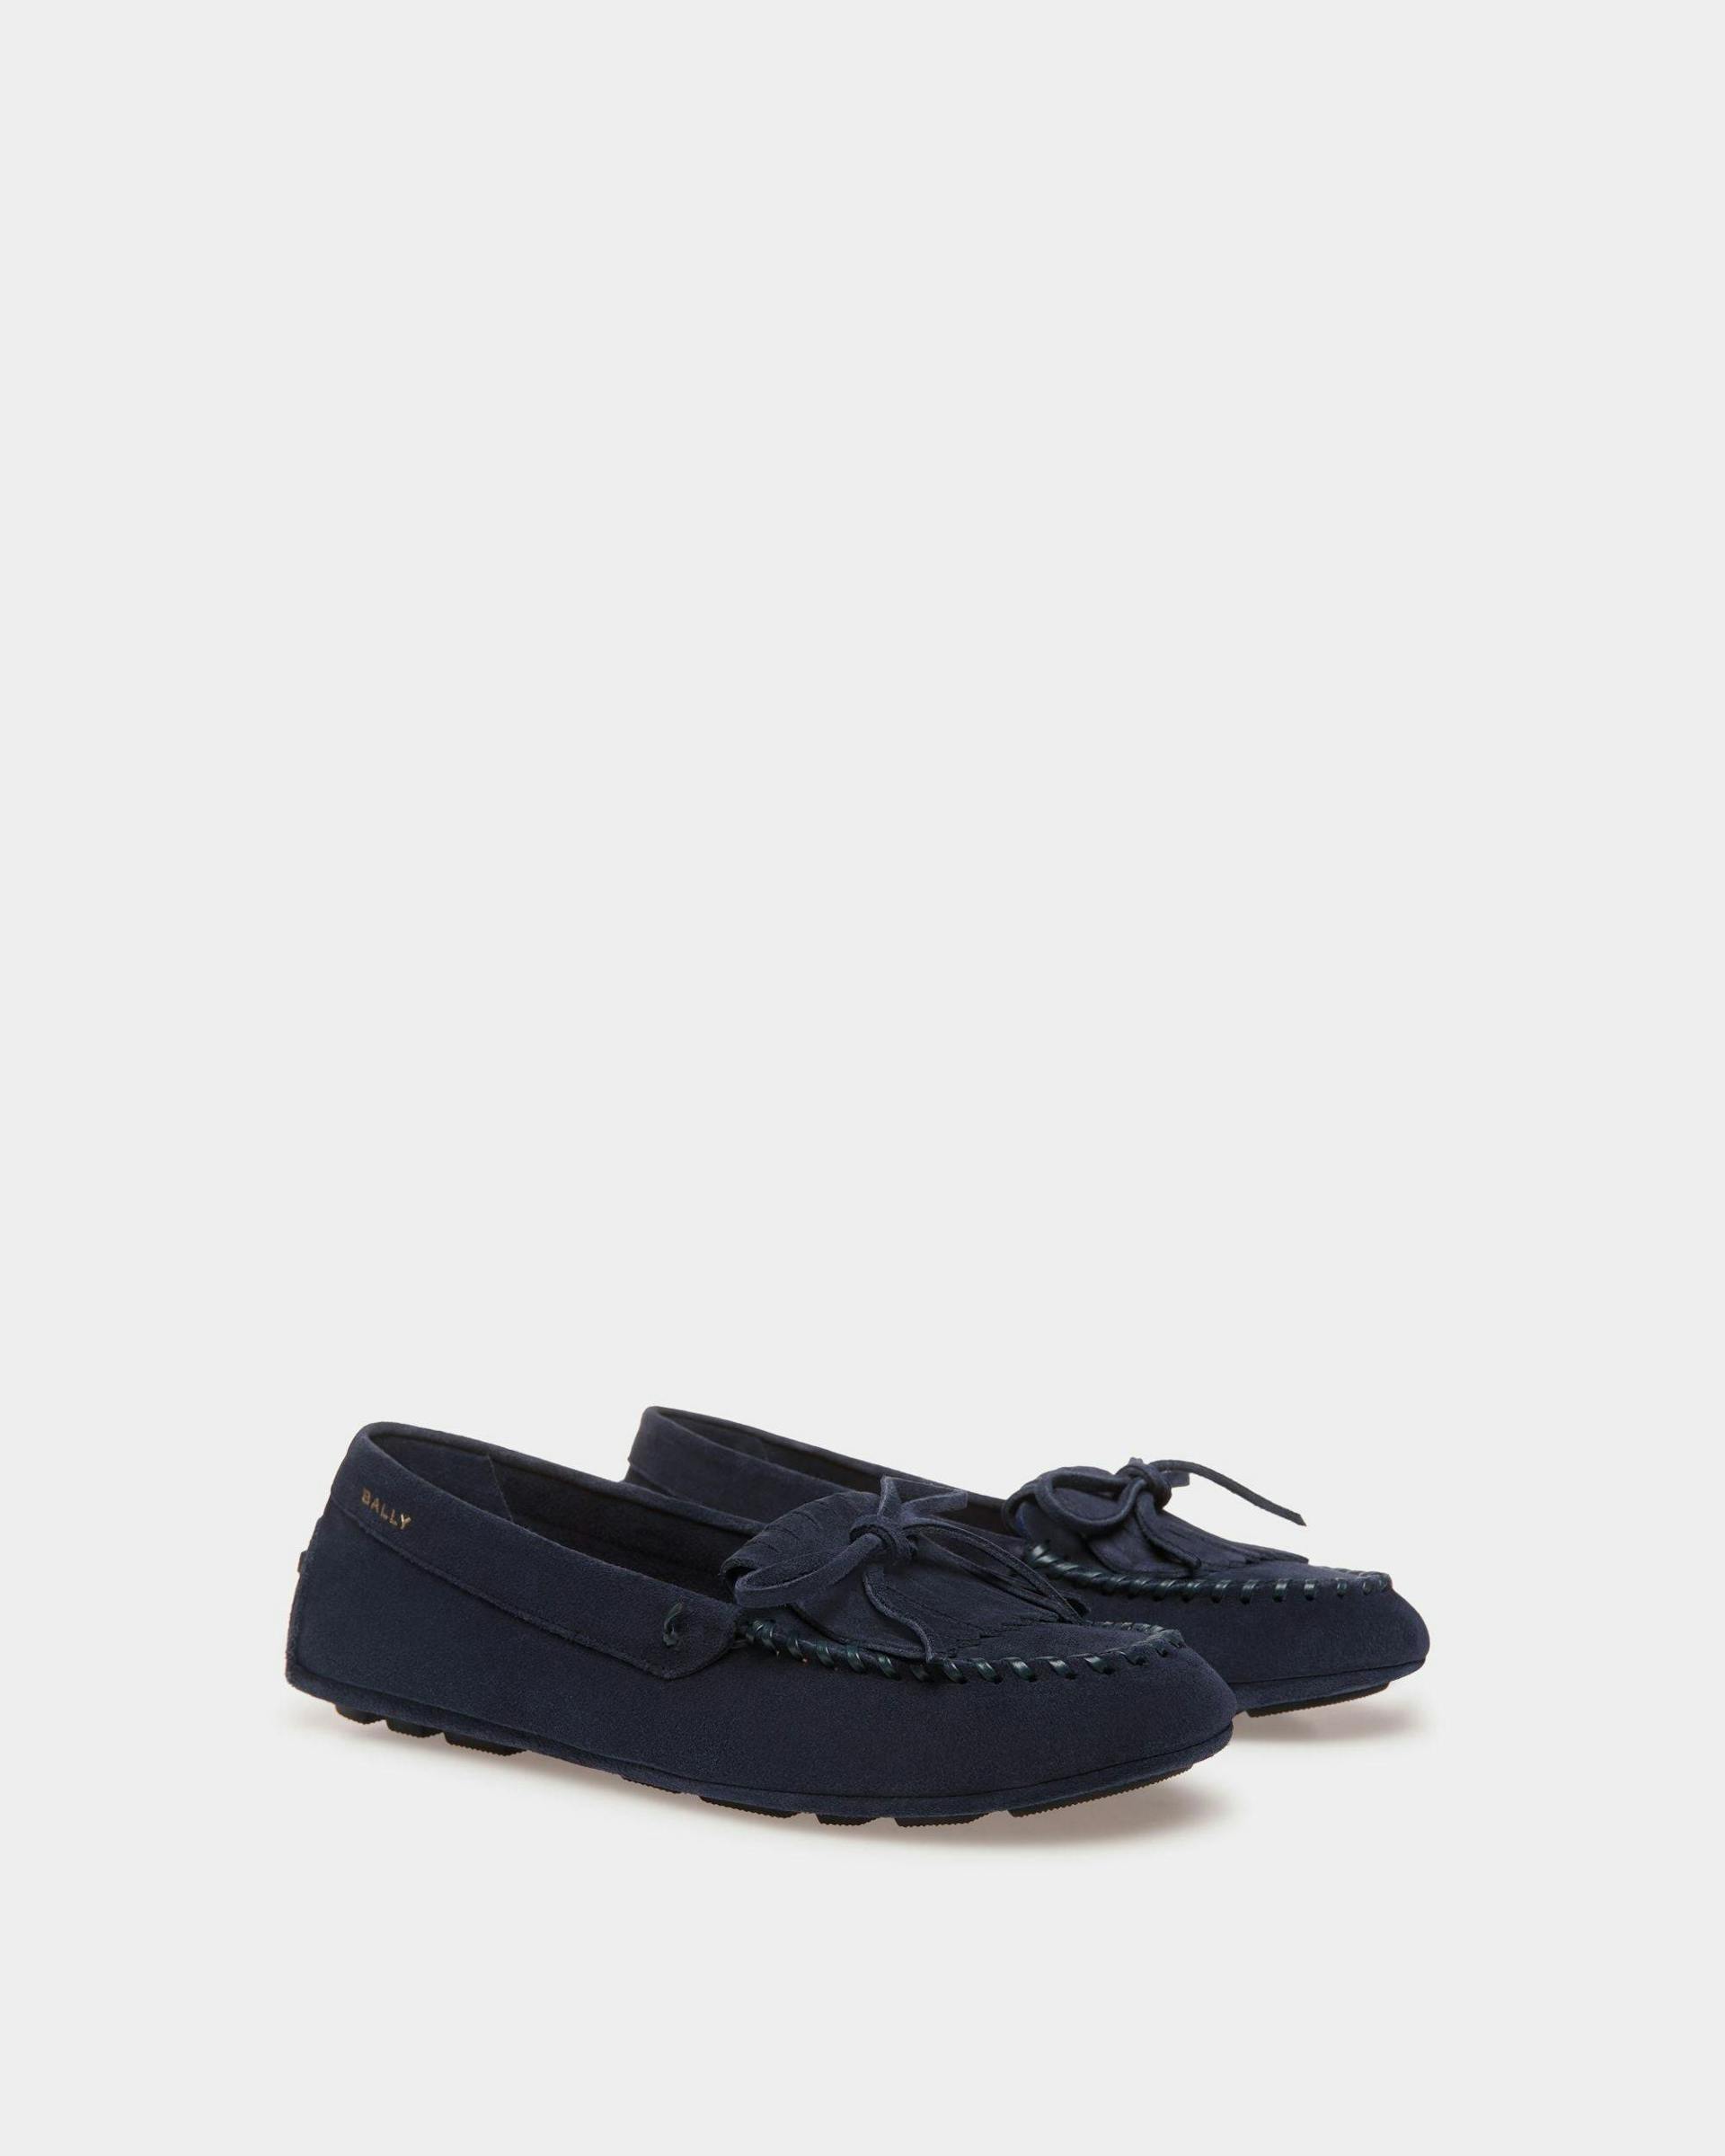 Women's Kerbs Driver in Blue Suede | Bally | Still Life 3/4 Front